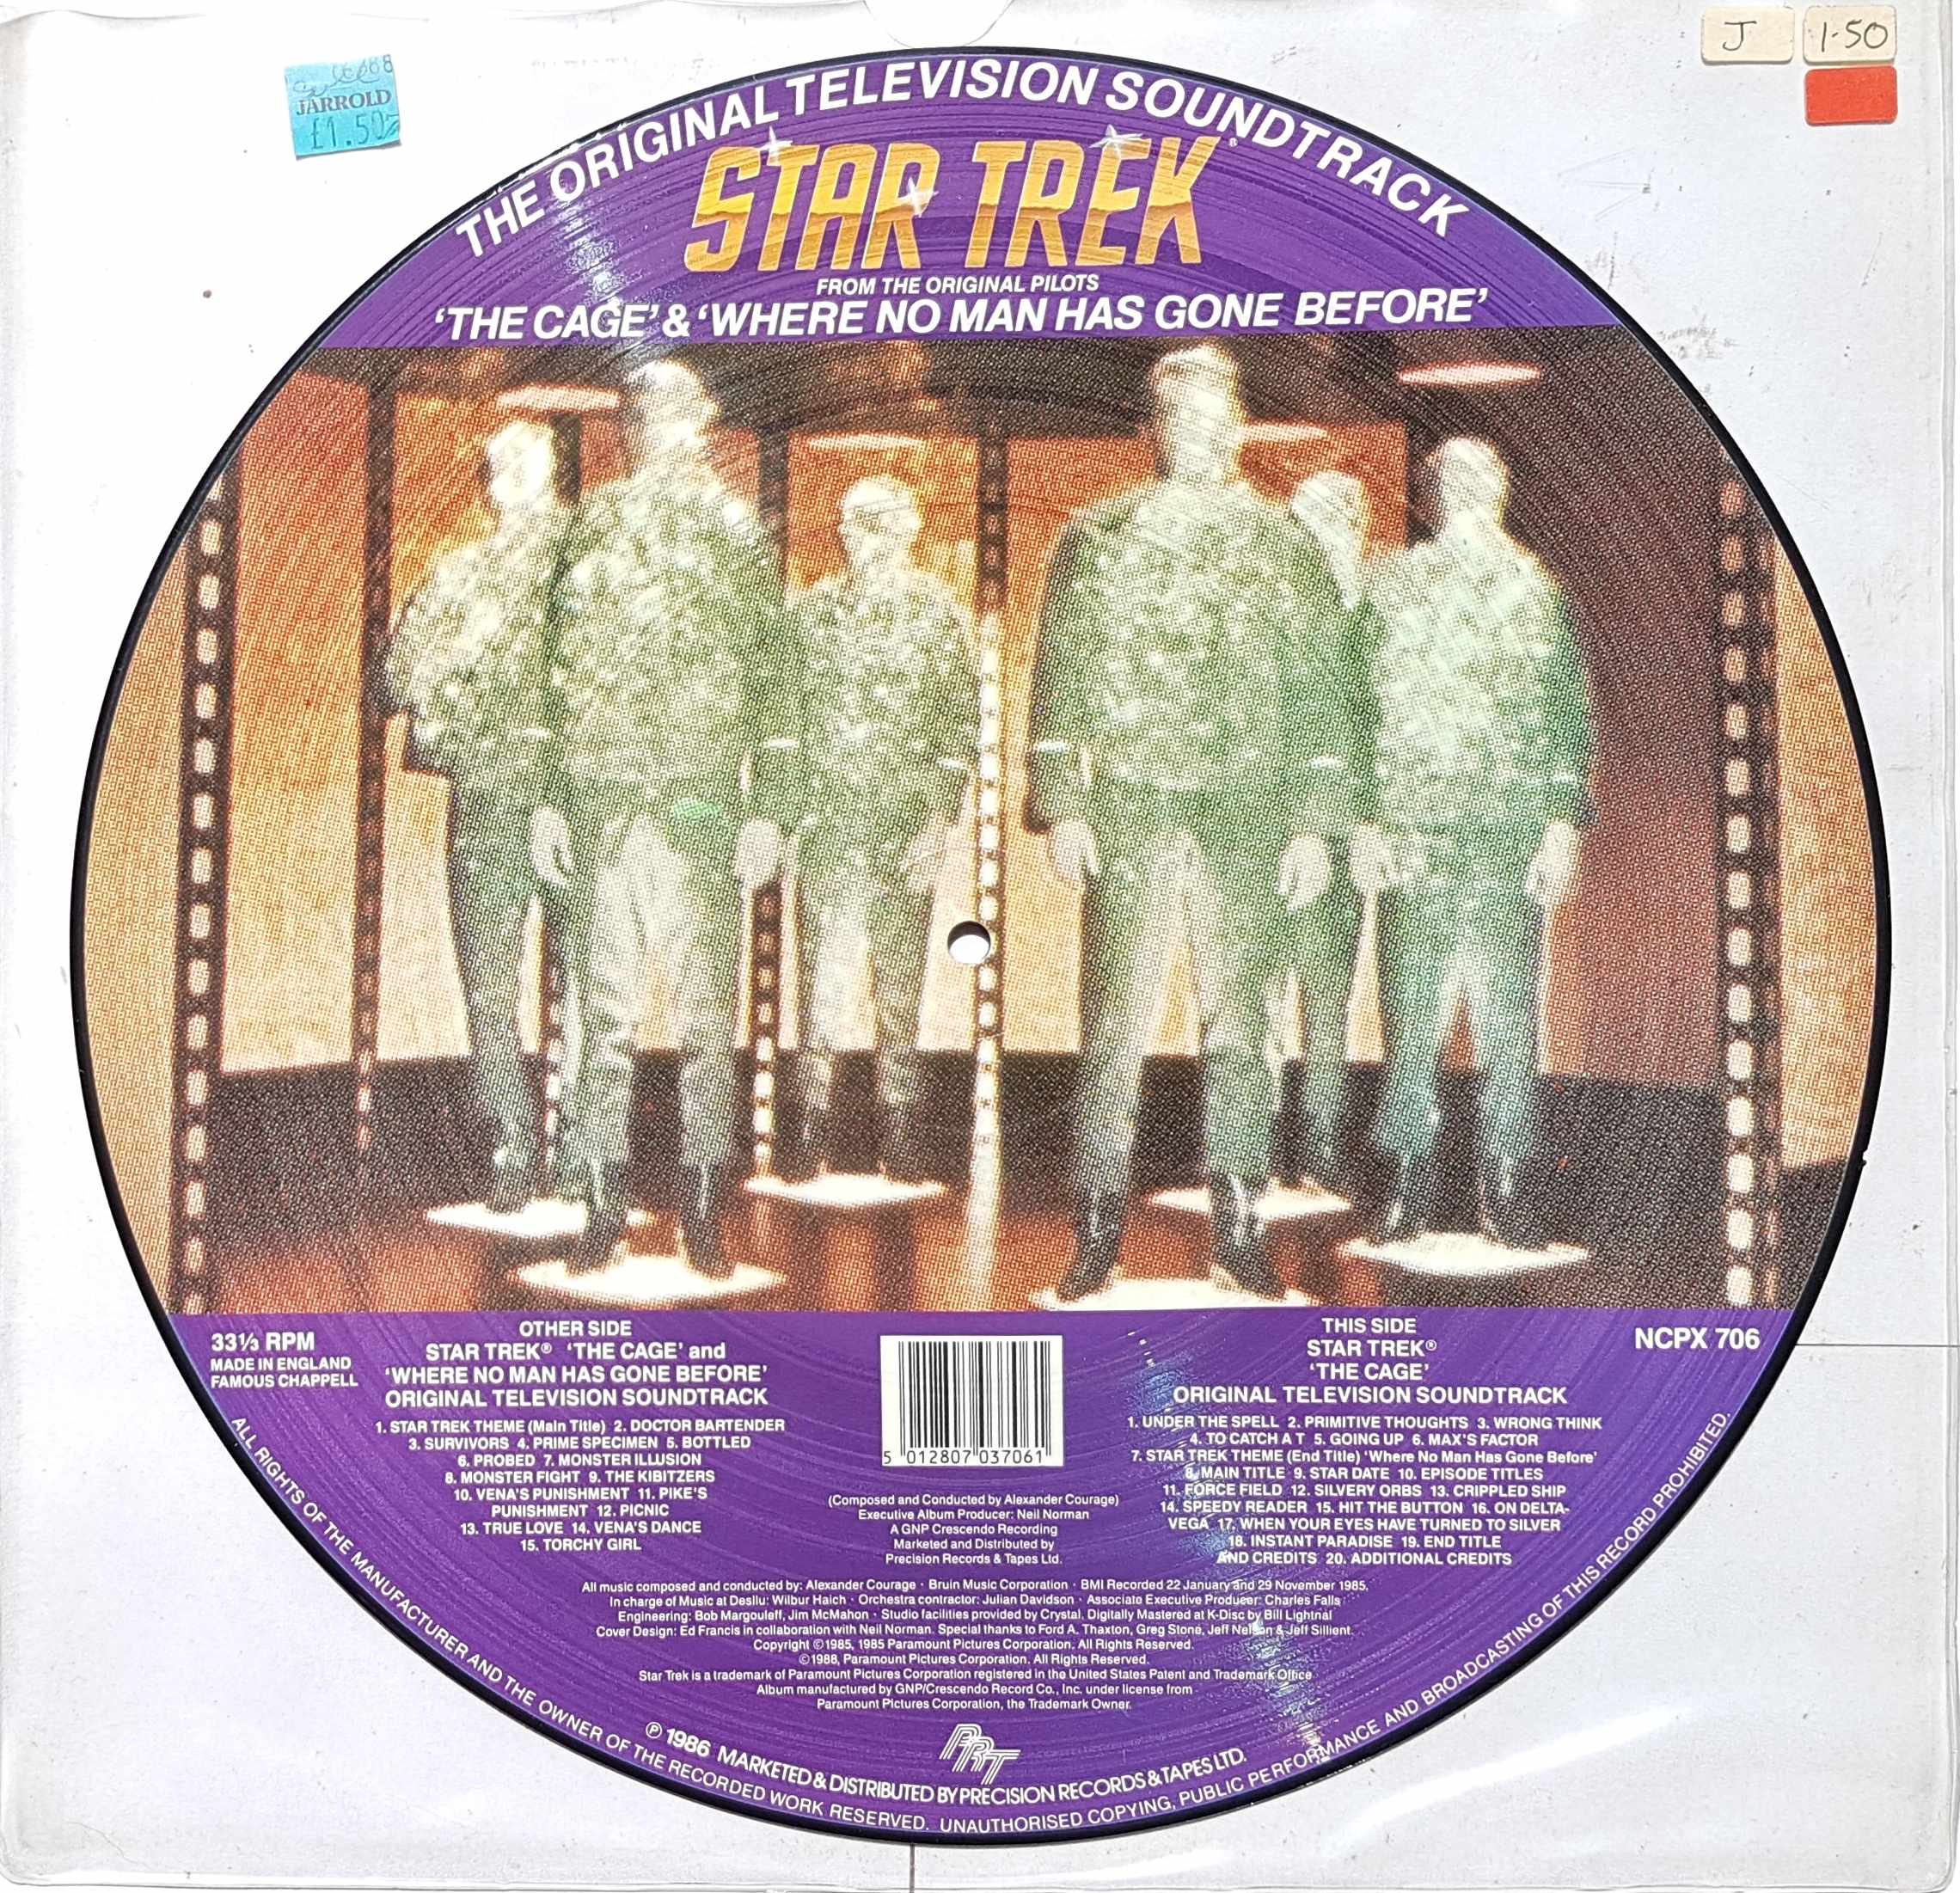 Picture of NCPX 706 Star trek - Picture disc by artist Alexander Courrage from the BBC albums - Records and Tapes library